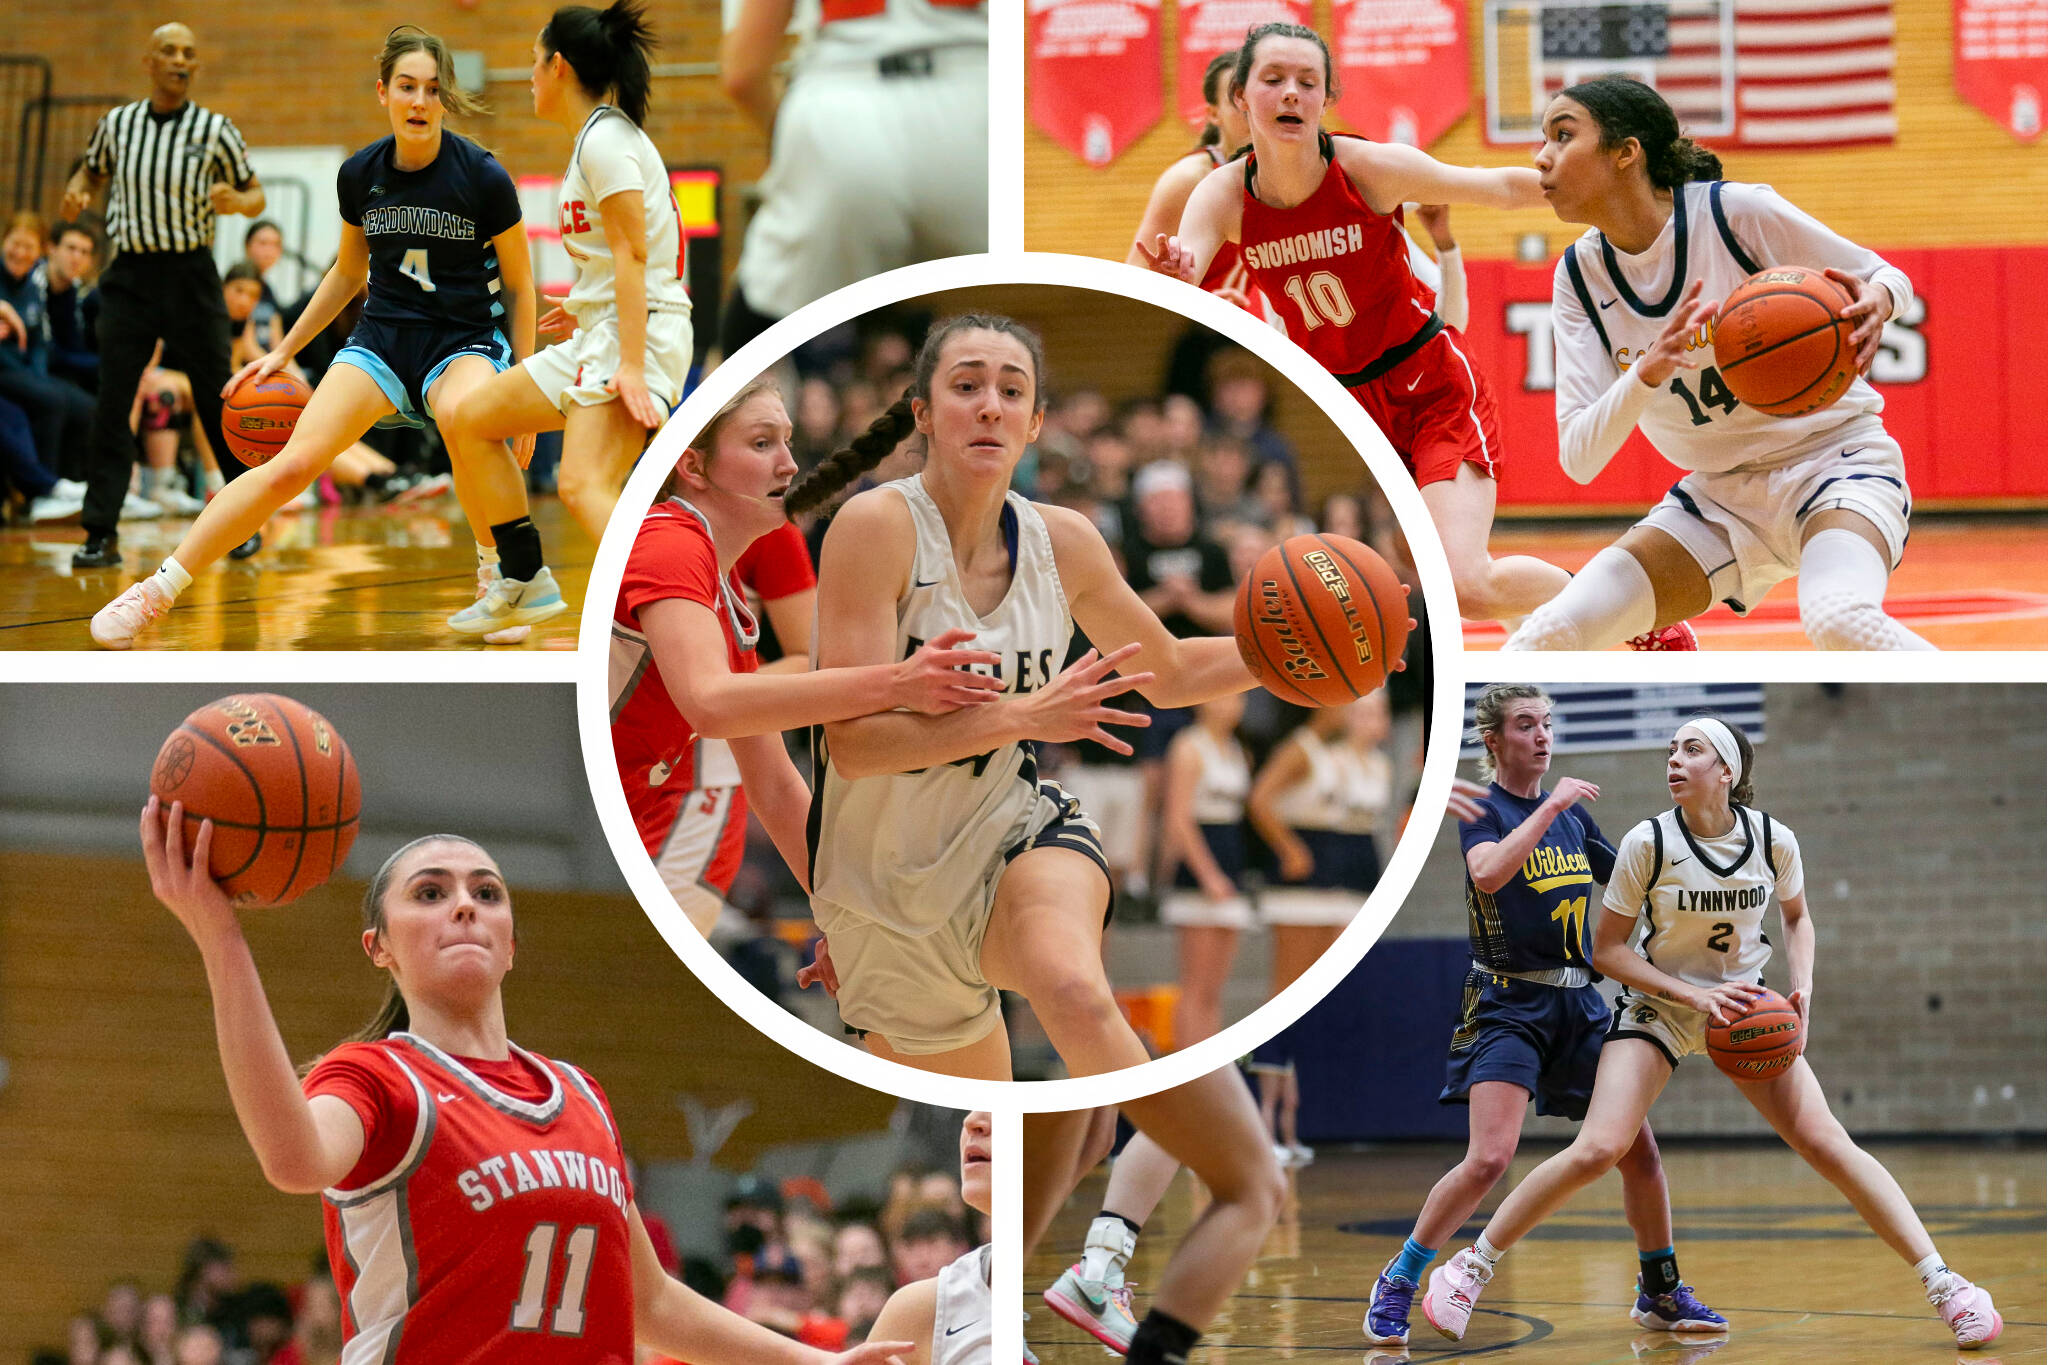 Five of the 12 teams in the Class 3A girls Hardwood Classic hail from Wesco. (Herald file photos)